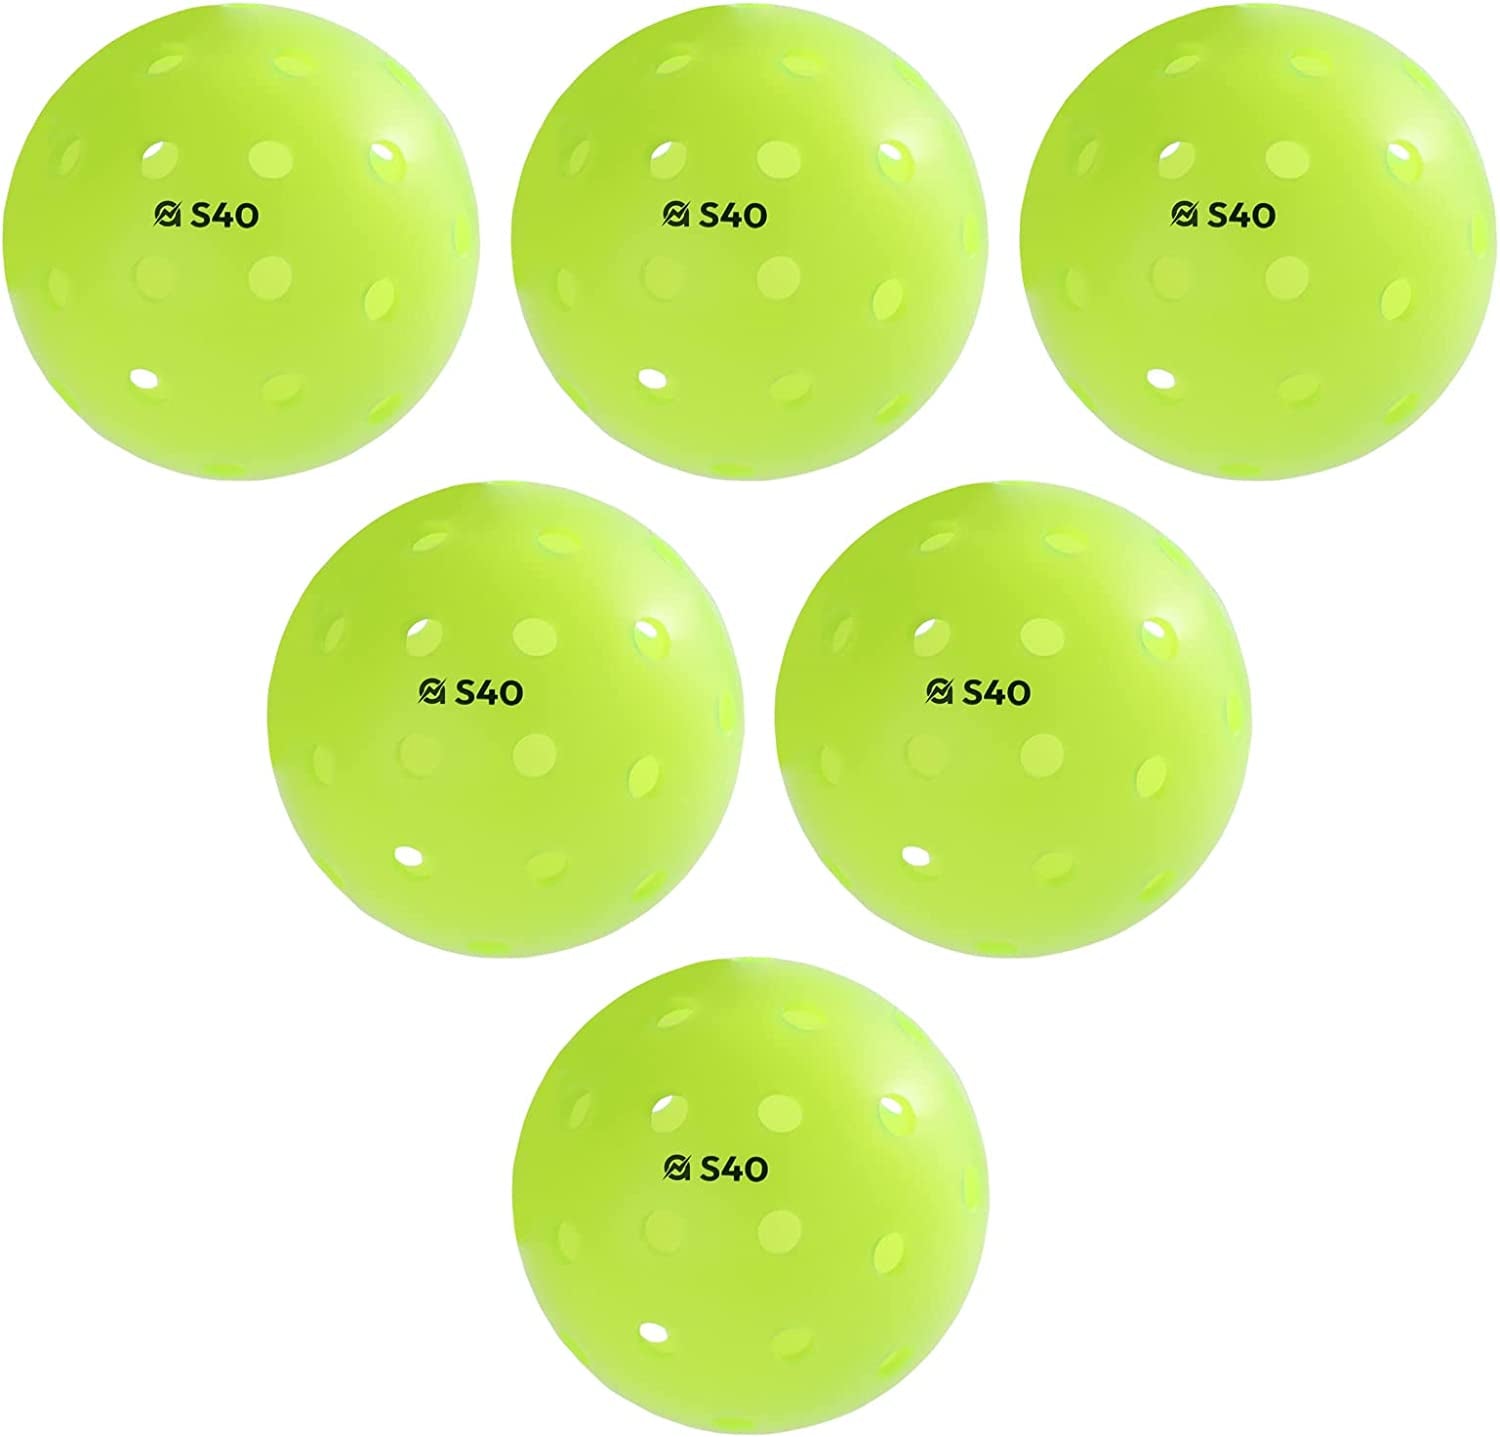 "Elevate Your Pickleball Performance with A11N S40 Outdoor Pickleball Balls - Approved by USA Pickleball, in Stylish Neon Green, Fuchsia, and Tangerine!"